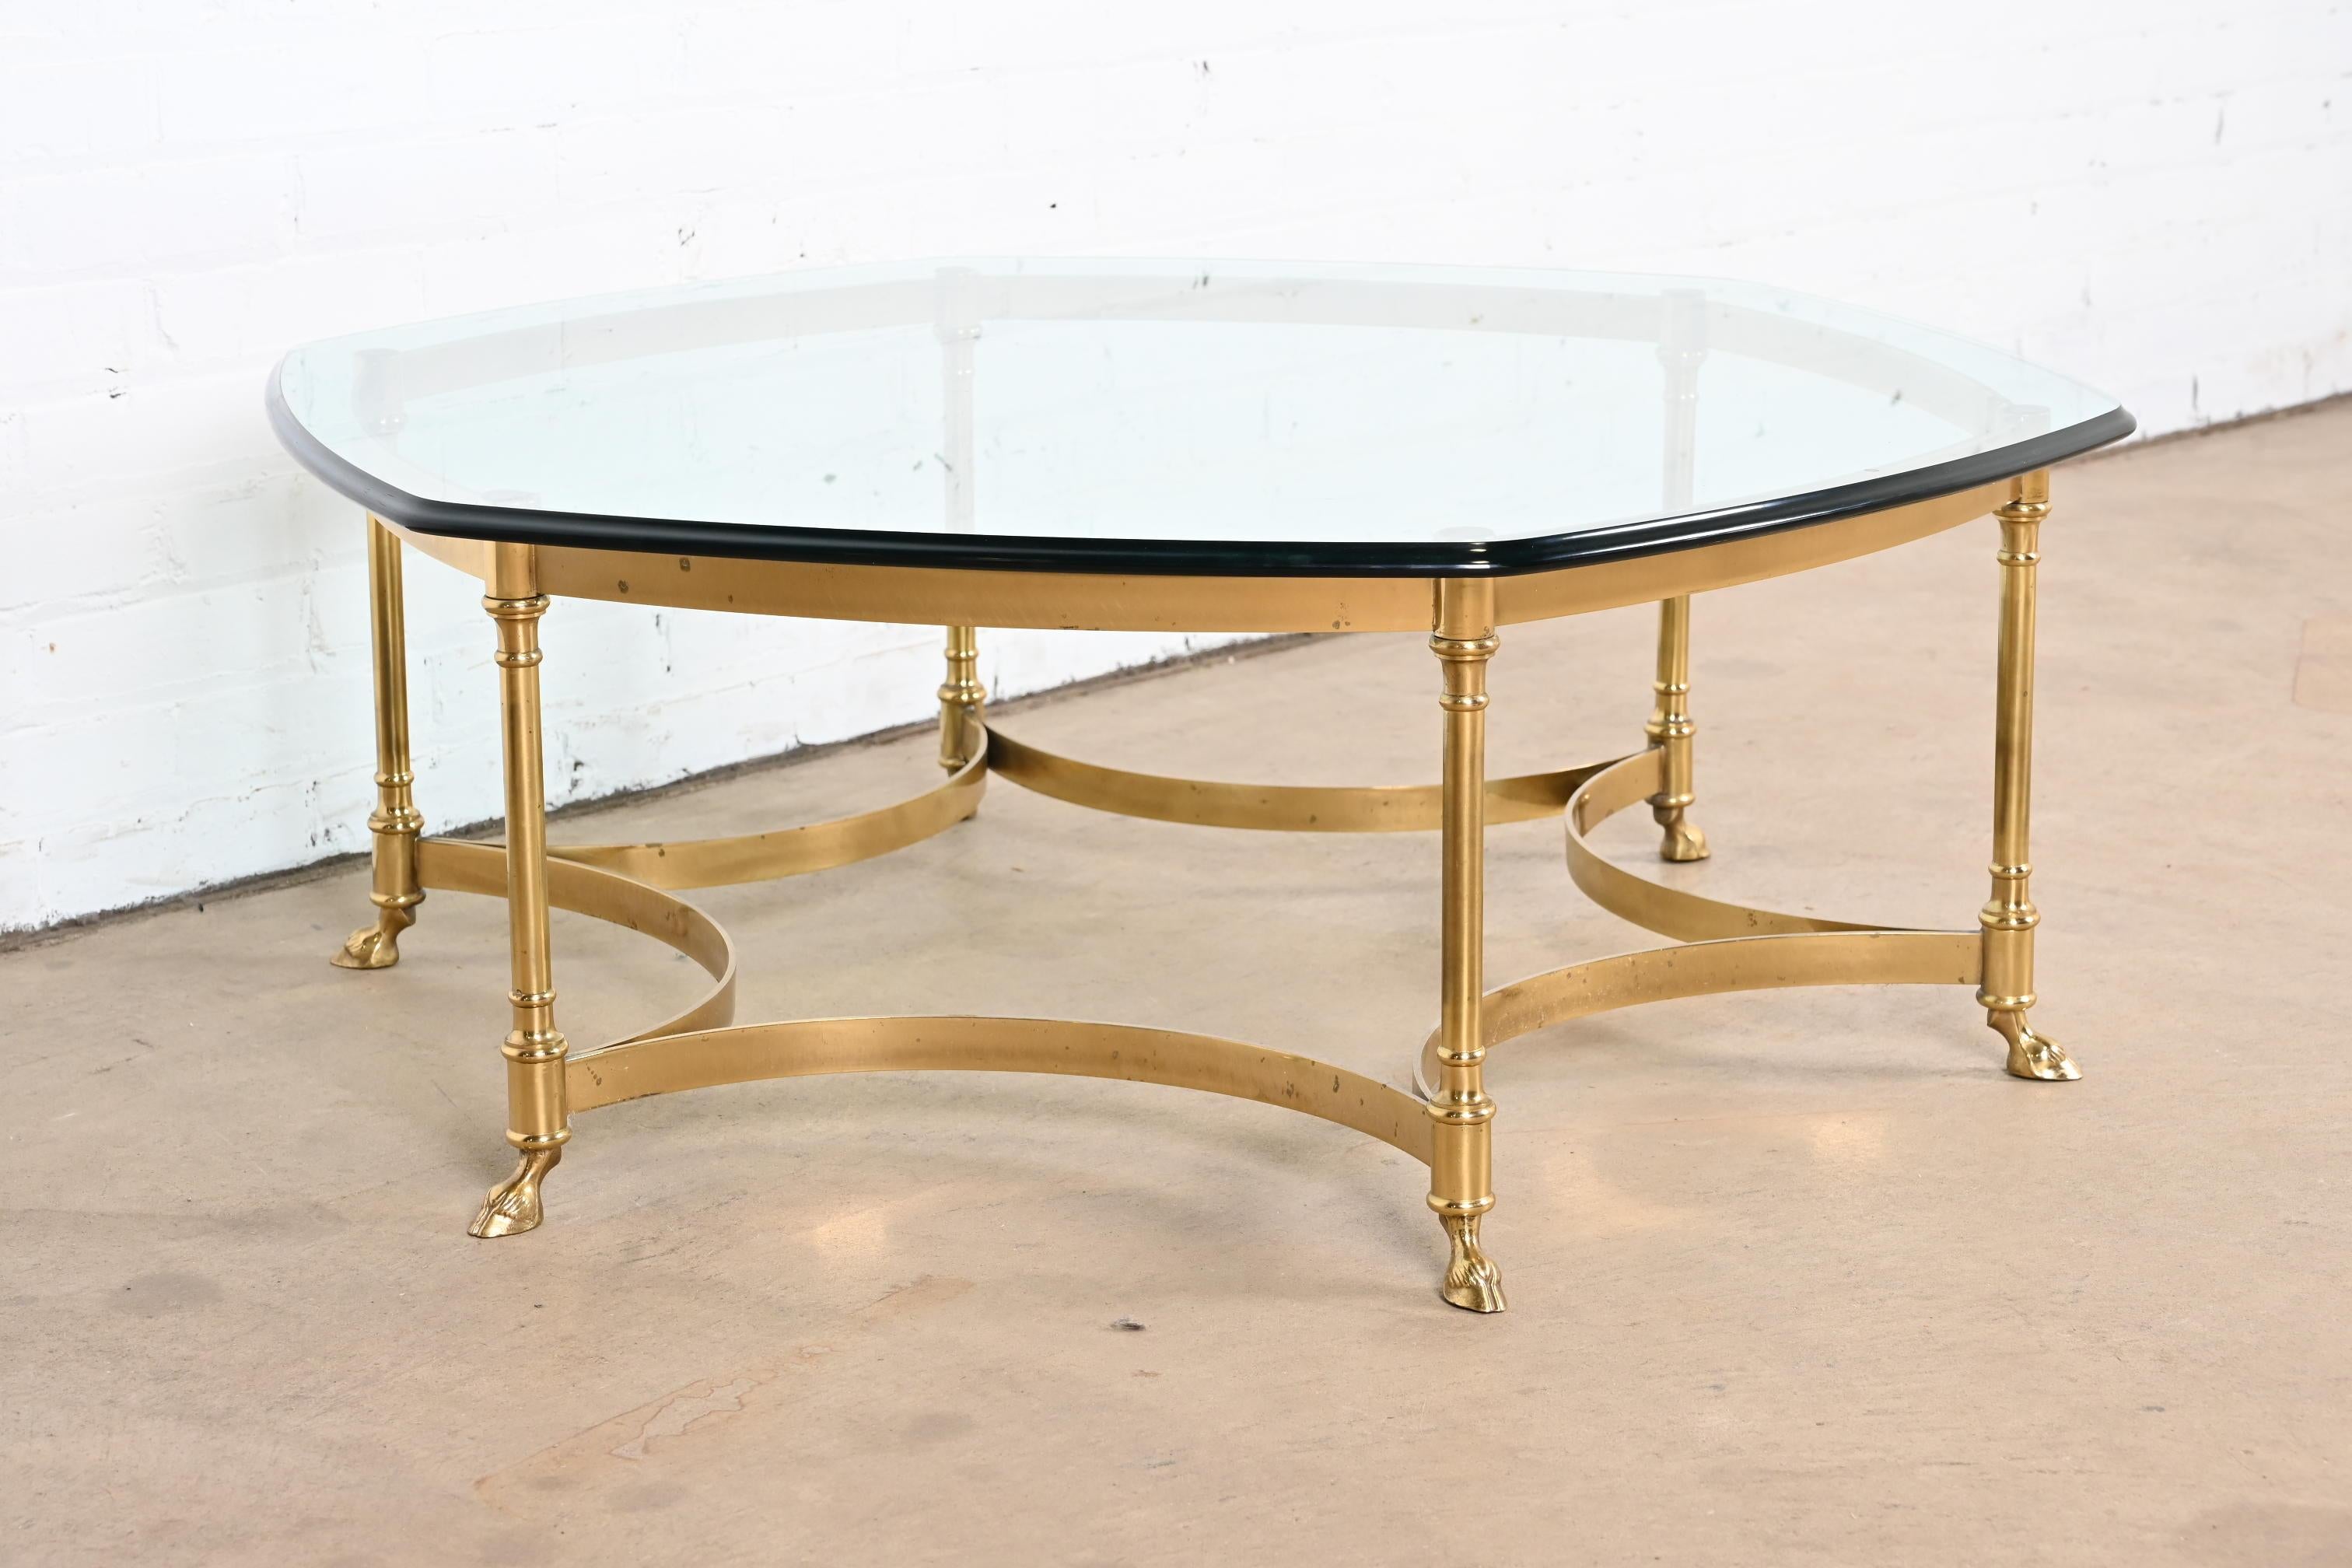 Labarge Hollywood Regency Brass and Glass Hooved Feet Cocktail Table, 1960s For Sale 1